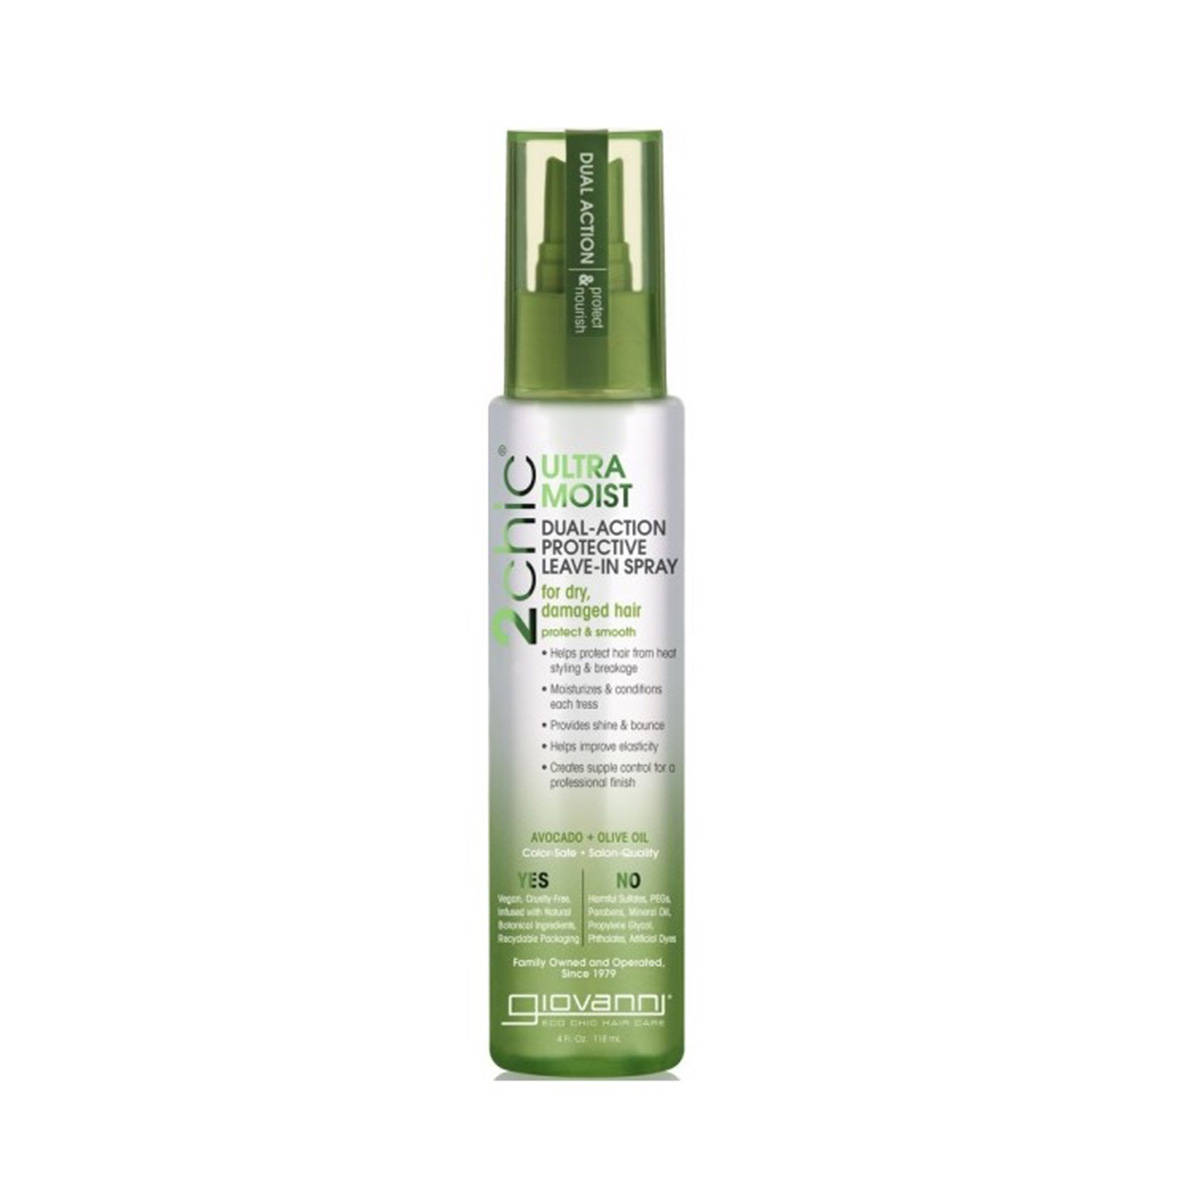 Giovanni 2chic Ultra Moist Avocado & Olive Oil Dual Action Protective Leave-in Spray 118ml